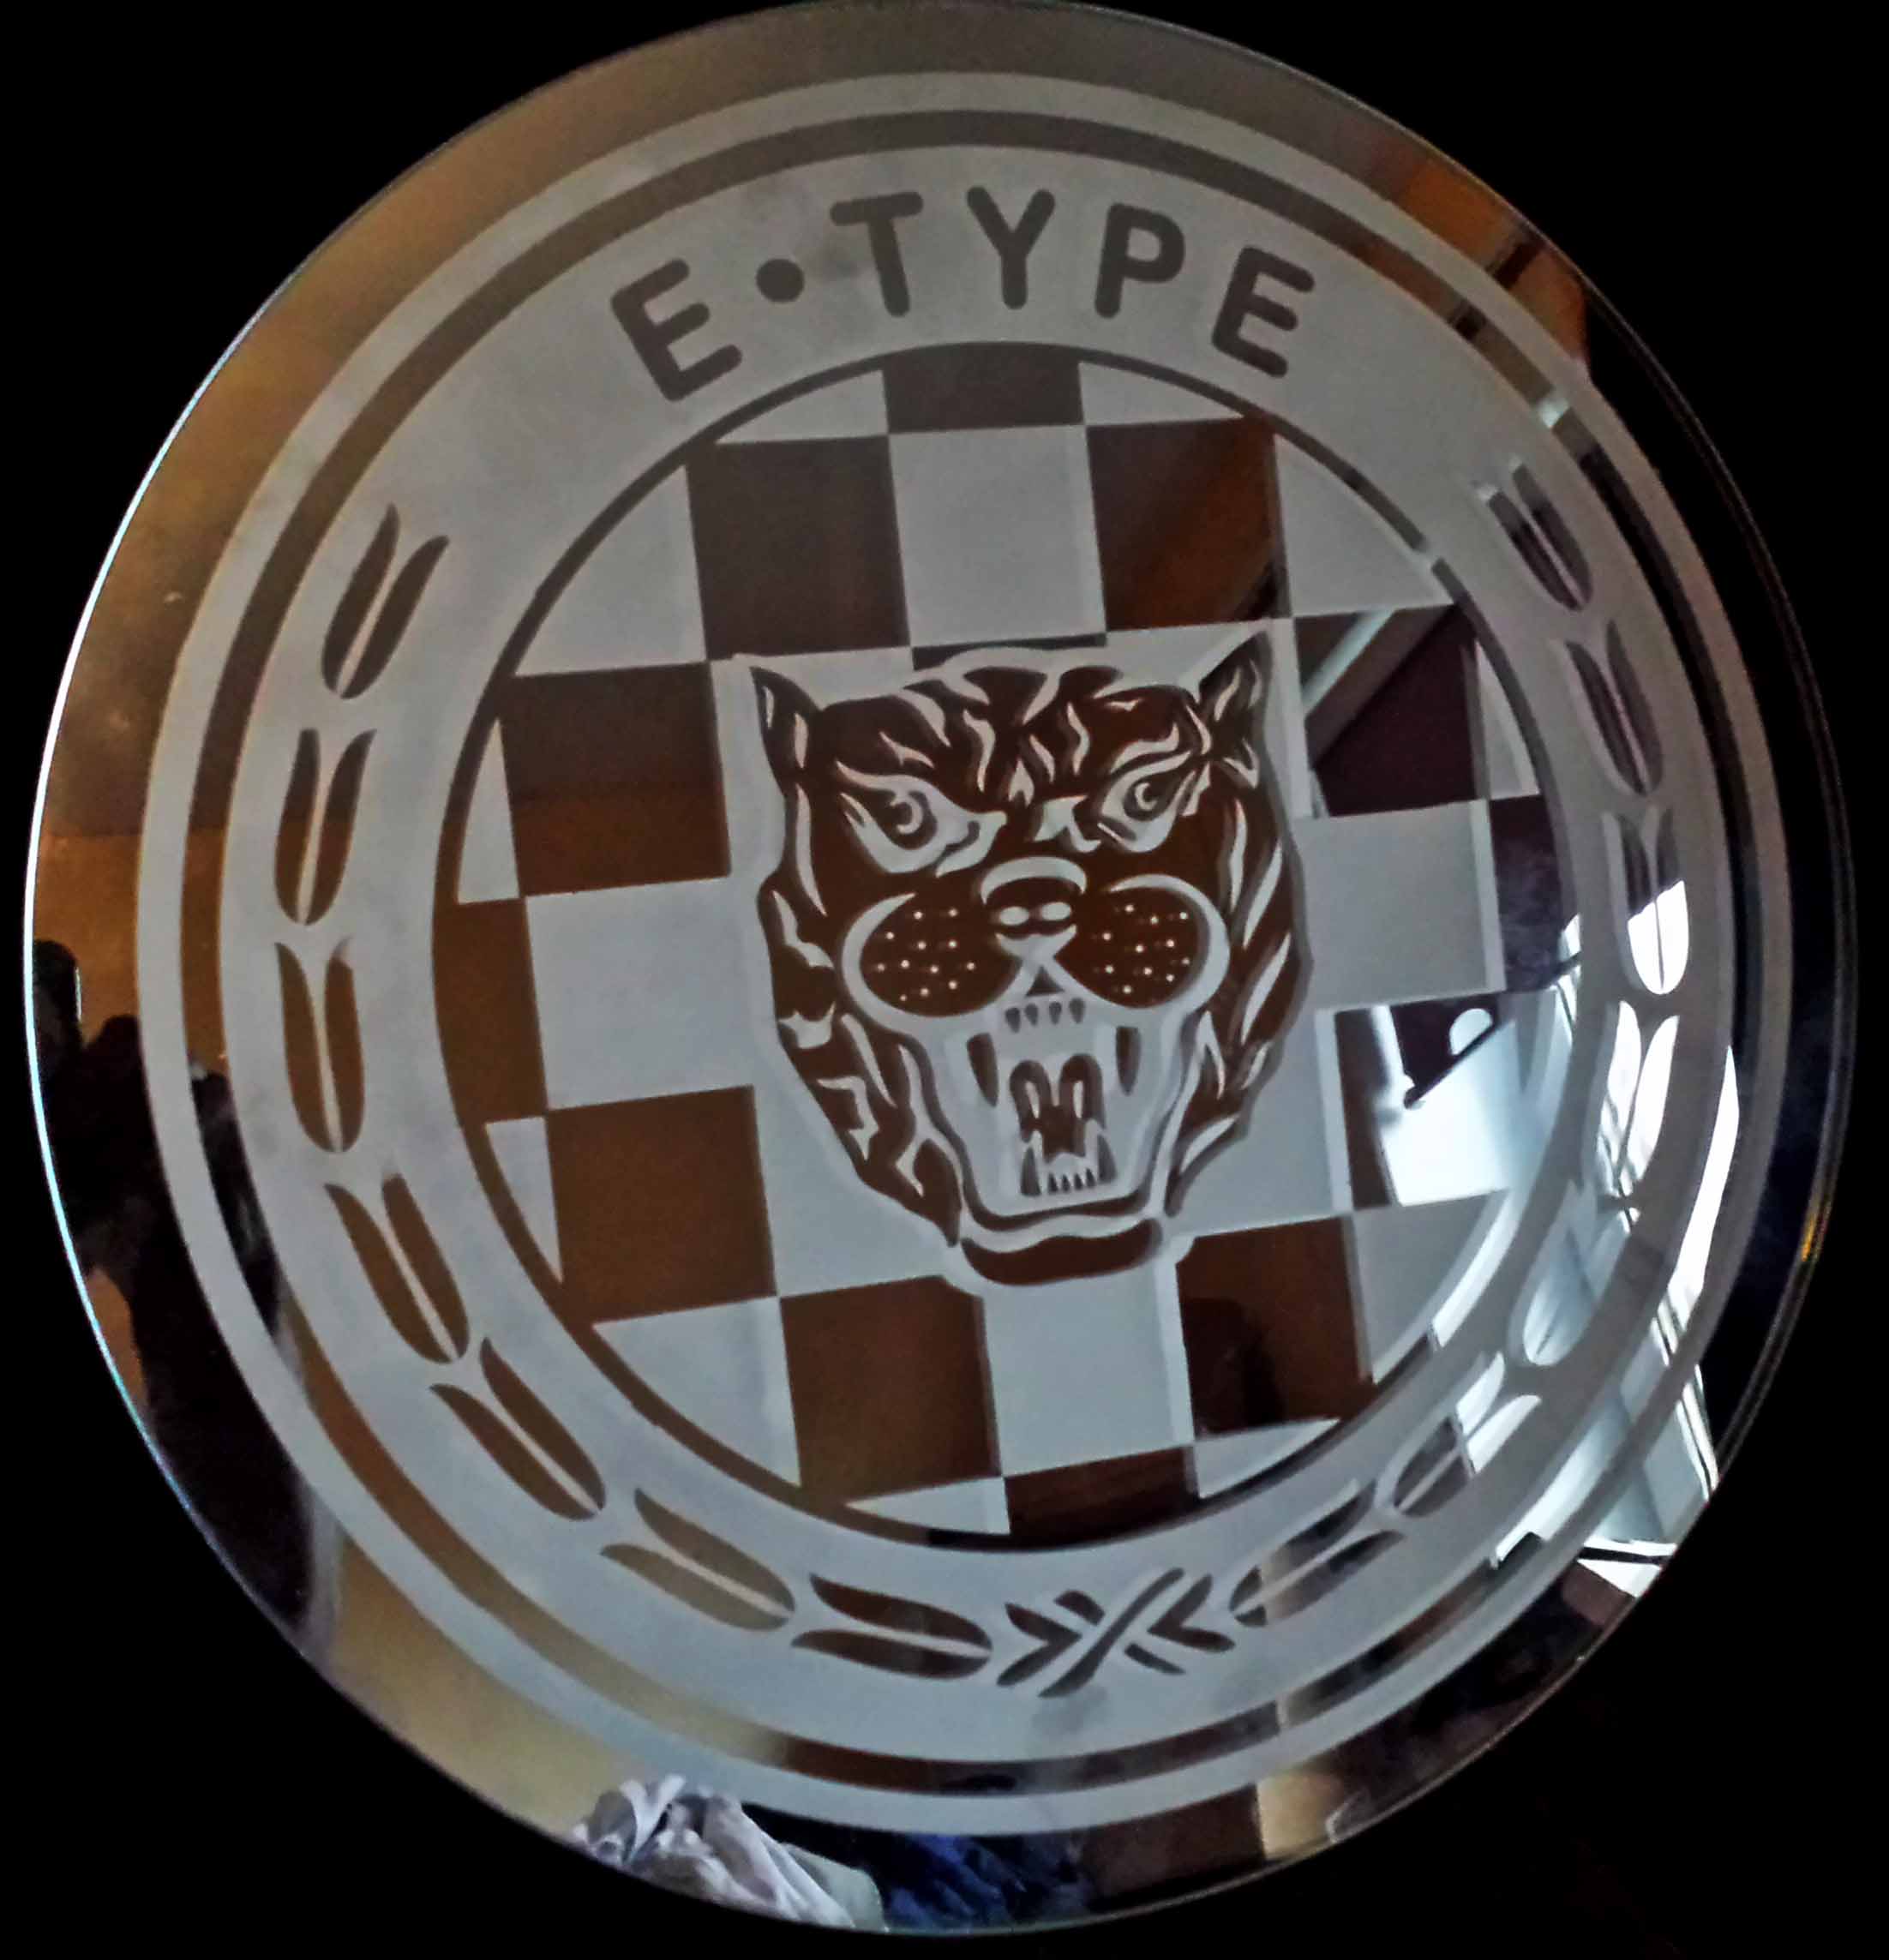 A round piece of safety glass 22 inch in diameter engraved with the E Type Jaguar logo.